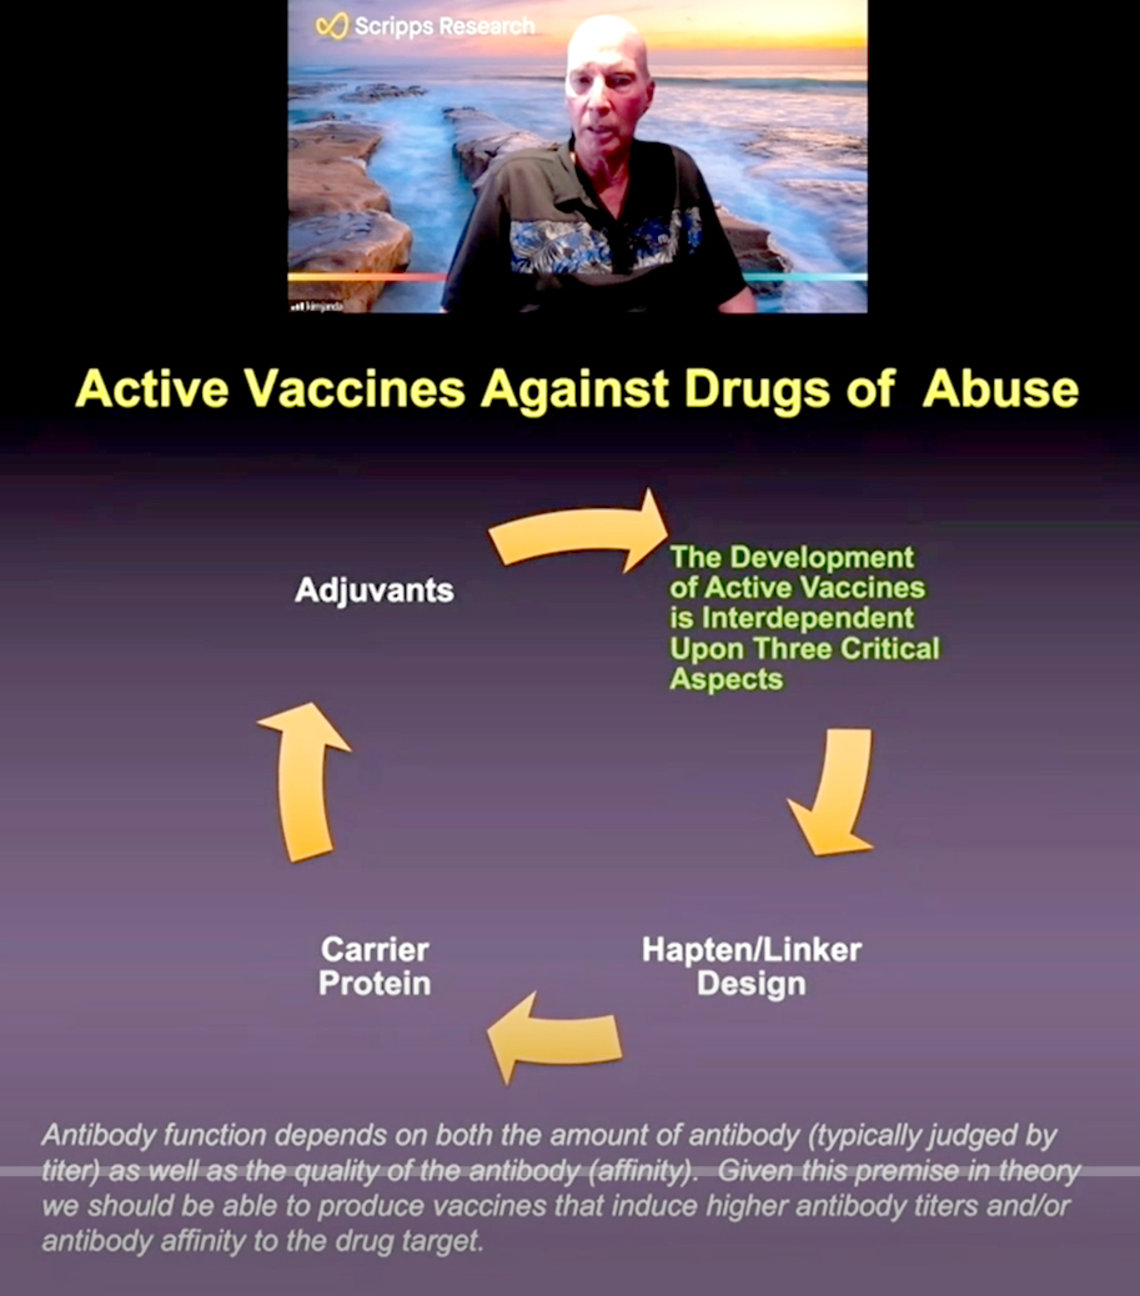 Janda gives a presentation. One slide depicts the active vaccines against drugs of abuse